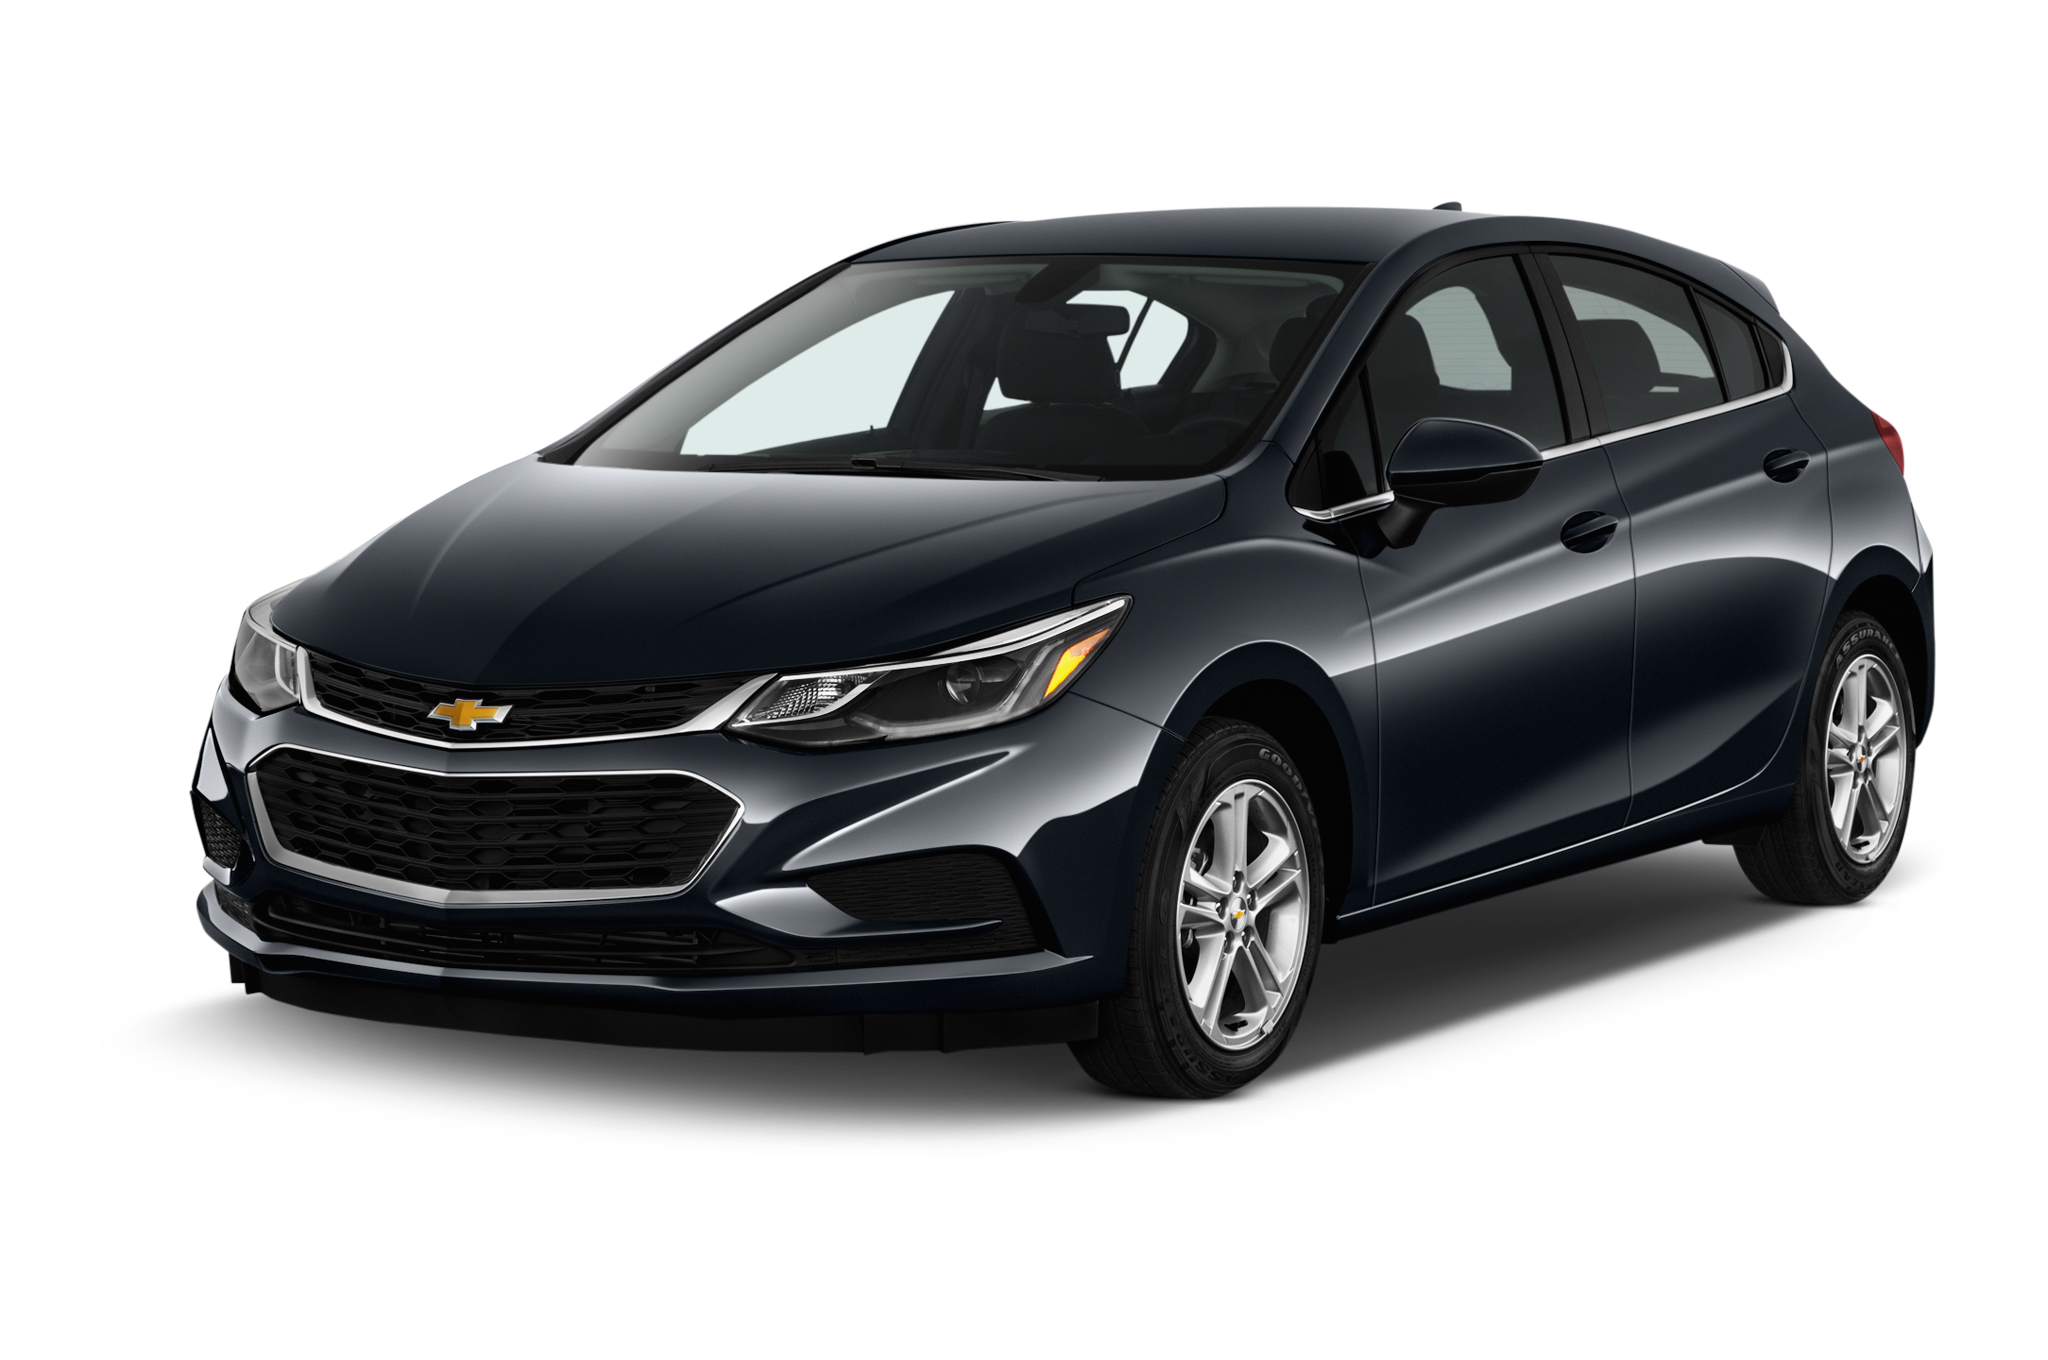 2018 Chevrolet Cruze LT w /RS Hatchback Manual Specs and Features - MSN ...